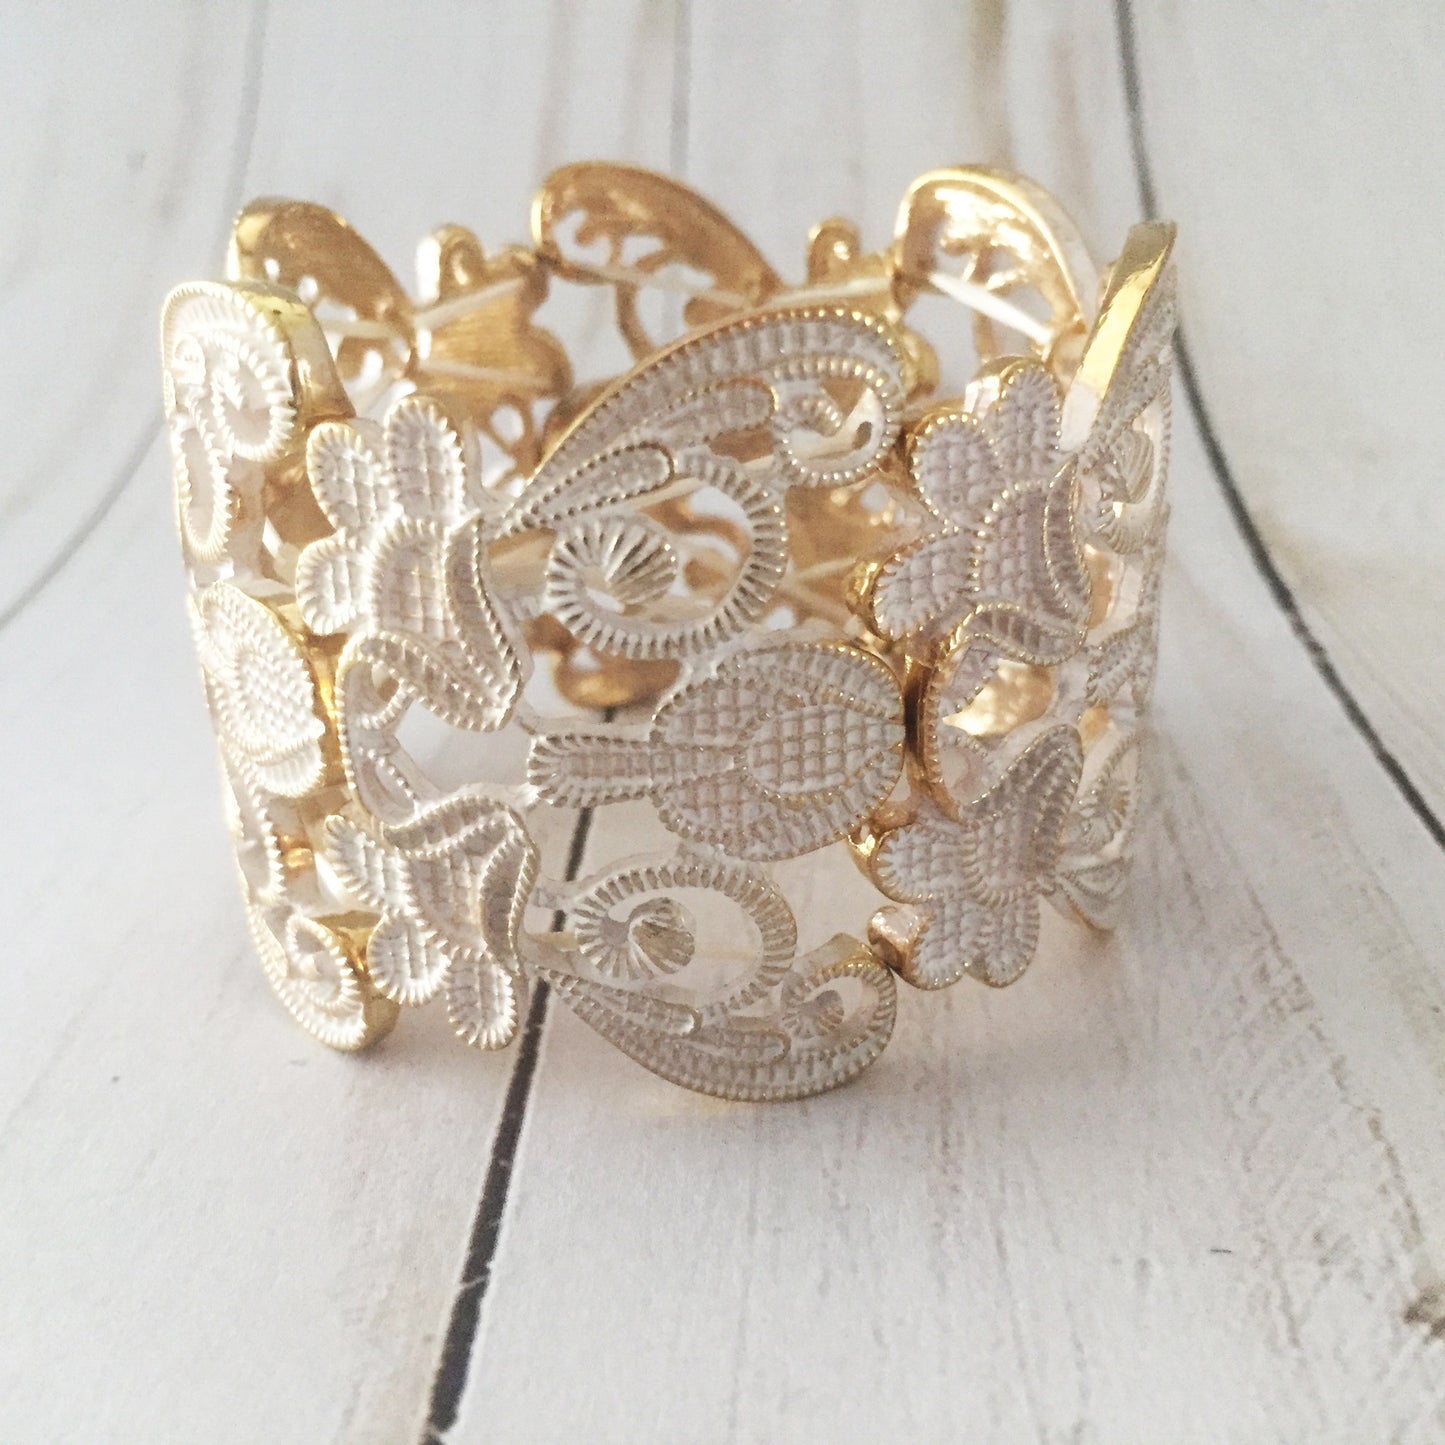 Lace Filigree Bracelet ~ White and Gold